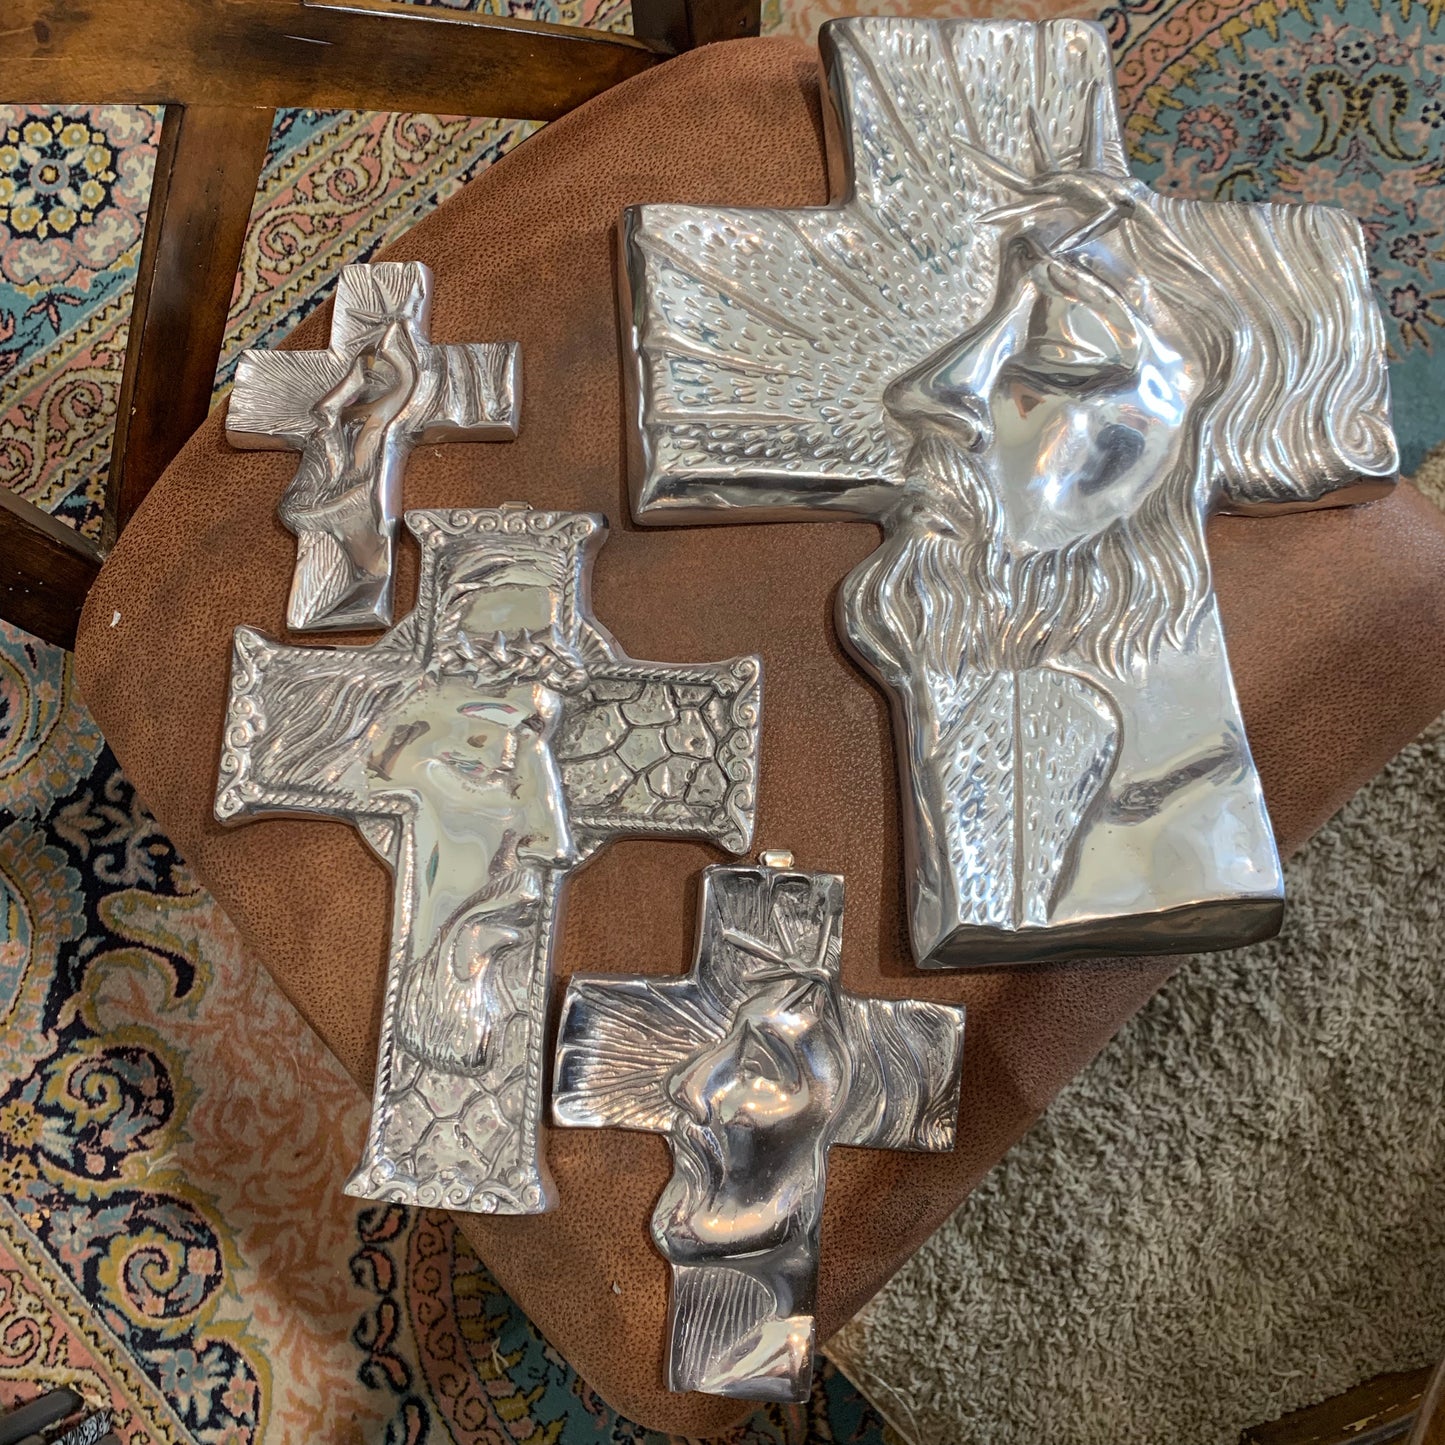 The Face of Jesus Pewter Cross